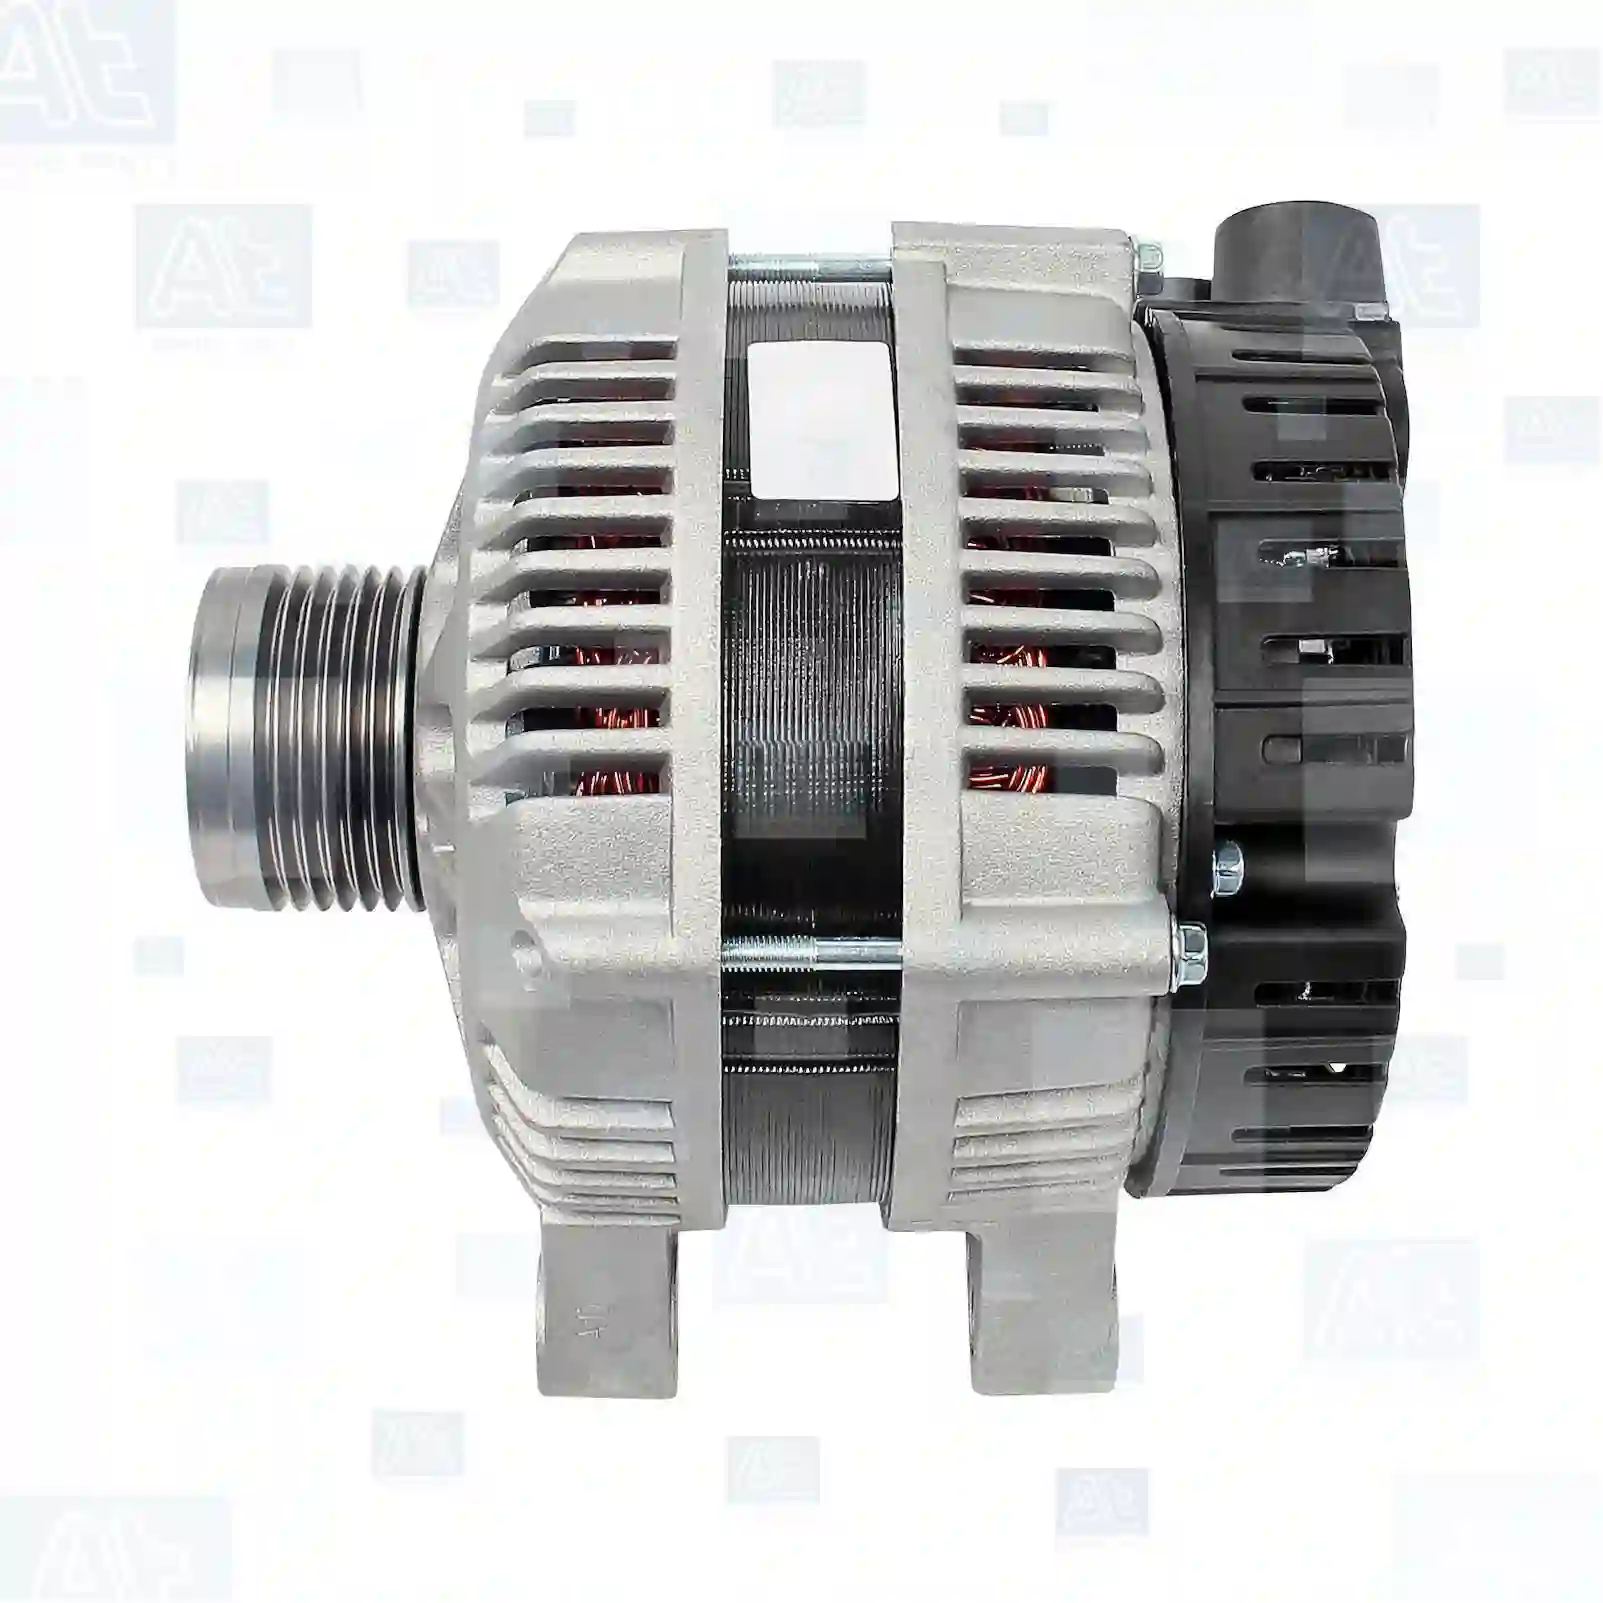 Alternator, 77710105, 5702A0, 5702A1, 57054S, 5705A1, 5705AA, 5705CL, 5705ER, 9467560380, 9636254180, 9640878780, 9641302580, 9645907580, 9655531380, 71723407, 71723408, 71723429, 71780165, 71780169, 9467560380, 9640878780, 9645907580, 9645907680, 9640878780, 5702A0, 5702A1, 57054S, 5705A1, 5705AA, 5705CL, 5705ER, 9467560380, 9636254180, 9640878780, 9641302580, 9645907580, 9655531380, 31400-68D00, 31400-68D01, 31400-68D02, 31400-68D02-000, 31400-68D02-LCP ||  77710105 At Spare Part | Engine, Accelerator Pedal, Camshaft, Connecting Rod, Crankcase, Crankshaft, Cylinder Head, Engine Suspension Mountings, Exhaust Manifold, Exhaust Gas Recirculation, Filter Kits, Flywheel Housing, General Overhaul Kits, Engine, Intake Manifold, Oil Cleaner, Oil Cooler, Oil Filter, Oil Pump, Oil Sump, Piston & Liner, Sensor & Switch, Timing Case, Turbocharger, Cooling System, Belt Tensioner, Coolant Filter, Coolant Pipe, Corrosion Prevention Agent, Drive, Expansion Tank, Fan, Intercooler, Monitors & Gauges, Radiator, Thermostat, V-Belt / Timing belt, Water Pump, Fuel System, Electronical Injector Unit, Feed Pump, Fuel Filter, cpl., Fuel Gauge Sender,  Fuel Line, Fuel Pump, Fuel Tank, Injection Line Kit, Injection Pump, Exhaust System, Clutch & Pedal, Gearbox, Propeller Shaft, Axles, Brake System, Hubs & Wheels, Suspension, Leaf Spring, Universal Parts / Accessories, Steering, Electrical System, Cabin Alternator, 77710105, 5702A0, 5702A1, 57054S, 5705A1, 5705AA, 5705CL, 5705ER, 9467560380, 9636254180, 9640878780, 9641302580, 9645907580, 9655531380, 71723407, 71723408, 71723429, 71780165, 71780169, 9467560380, 9640878780, 9645907580, 9645907680, 9640878780, 5702A0, 5702A1, 57054S, 5705A1, 5705AA, 5705CL, 5705ER, 9467560380, 9636254180, 9640878780, 9641302580, 9645907580, 9655531380, 31400-68D00, 31400-68D01, 31400-68D02, 31400-68D02-000, 31400-68D02-LCP ||  77710105 At Spare Part | Engine, Accelerator Pedal, Camshaft, Connecting Rod, Crankcase, Crankshaft, Cylinder Head, Engine Suspension Mountings, Exhaust Manifold, Exhaust Gas Recirculation, Filter Kits, Flywheel Housing, General Overhaul Kits, Engine, Intake Manifold, Oil Cleaner, Oil Cooler, Oil Filter, Oil Pump, Oil Sump, Piston & Liner, Sensor & Switch, Timing Case, Turbocharger, Cooling System, Belt Tensioner, Coolant Filter, Coolant Pipe, Corrosion Prevention Agent, Drive, Expansion Tank, Fan, Intercooler, Monitors & Gauges, Radiator, Thermostat, V-Belt / Timing belt, Water Pump, Fuel System, Electronical Injector Unit, Feed Pump, Fuel Filter, cpl., Fuel Gauge Sender,  Fuel Line, Fuel Pump, Fuel Tank, Injection Line Kit, Injection Pump, Exhaust System, Clutch & Pedal, Gearbox, Propeller Shaft, Axles, Brake System, Hubs & Wheels, Suspension, Leaf Spring, Universal Parts / Accessories, Steering, Electrical System, Cabin